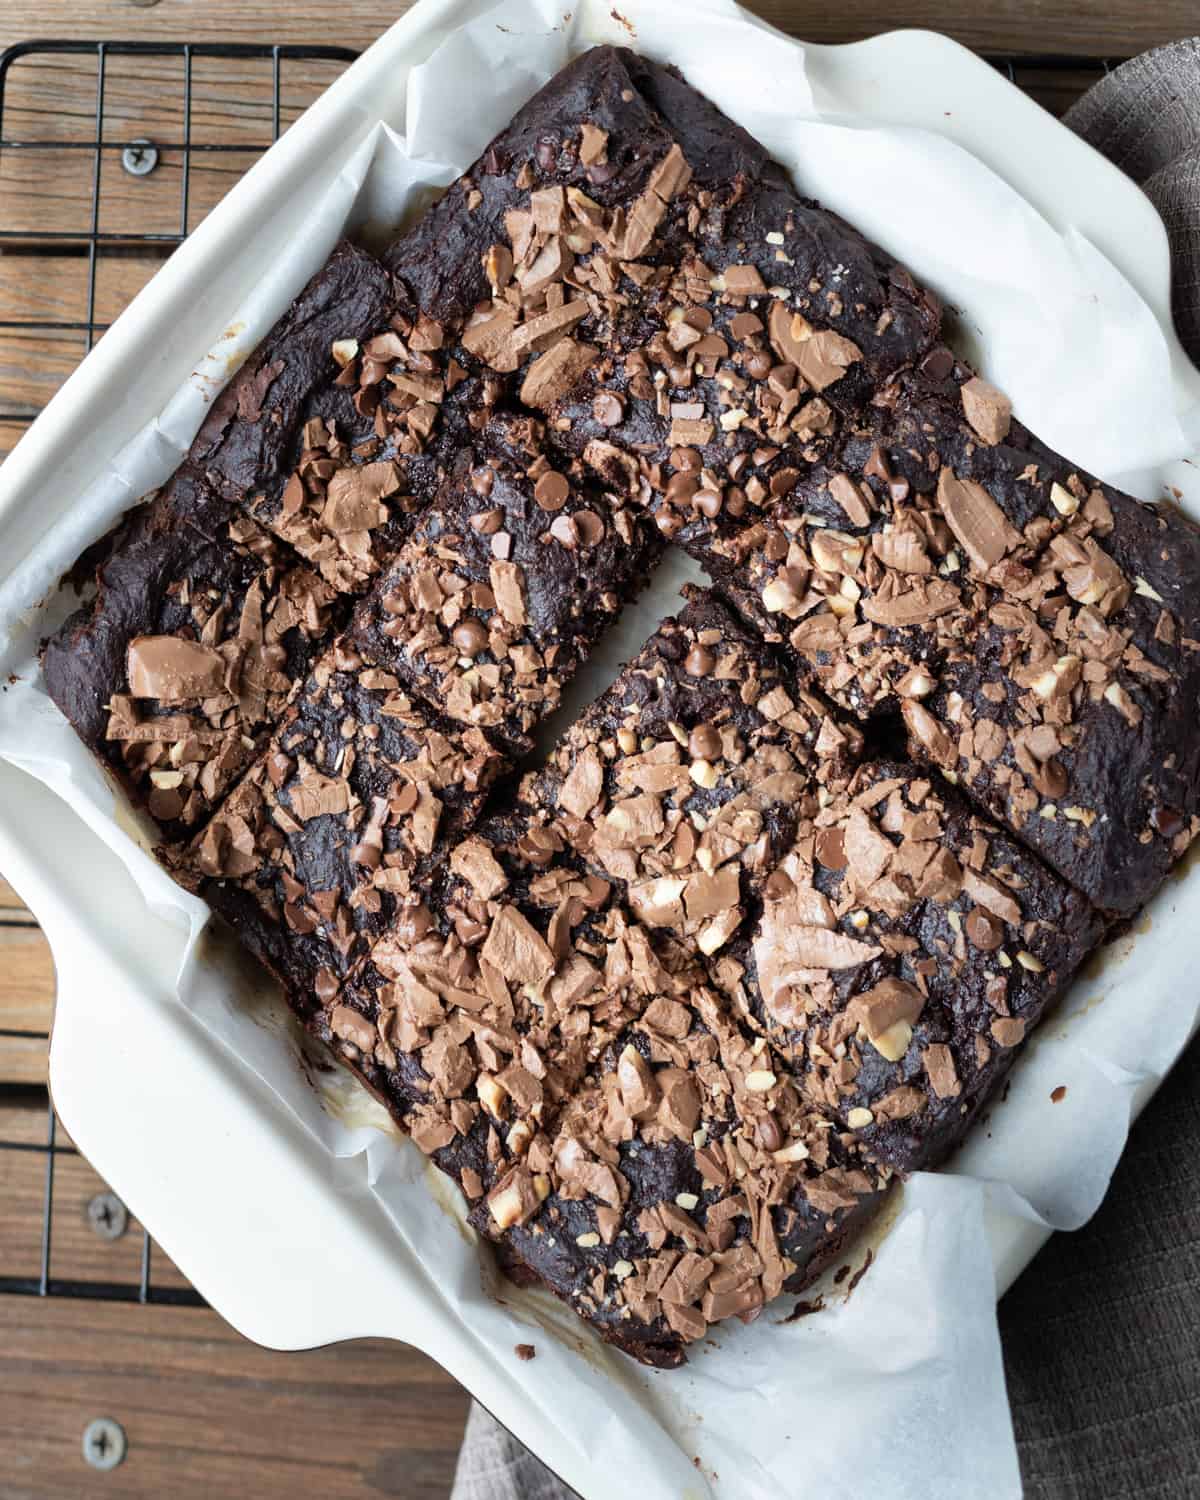 Cooked dairy-free brownies in a cake pan. The brownies are cut into squares and topped with chocolate chips.